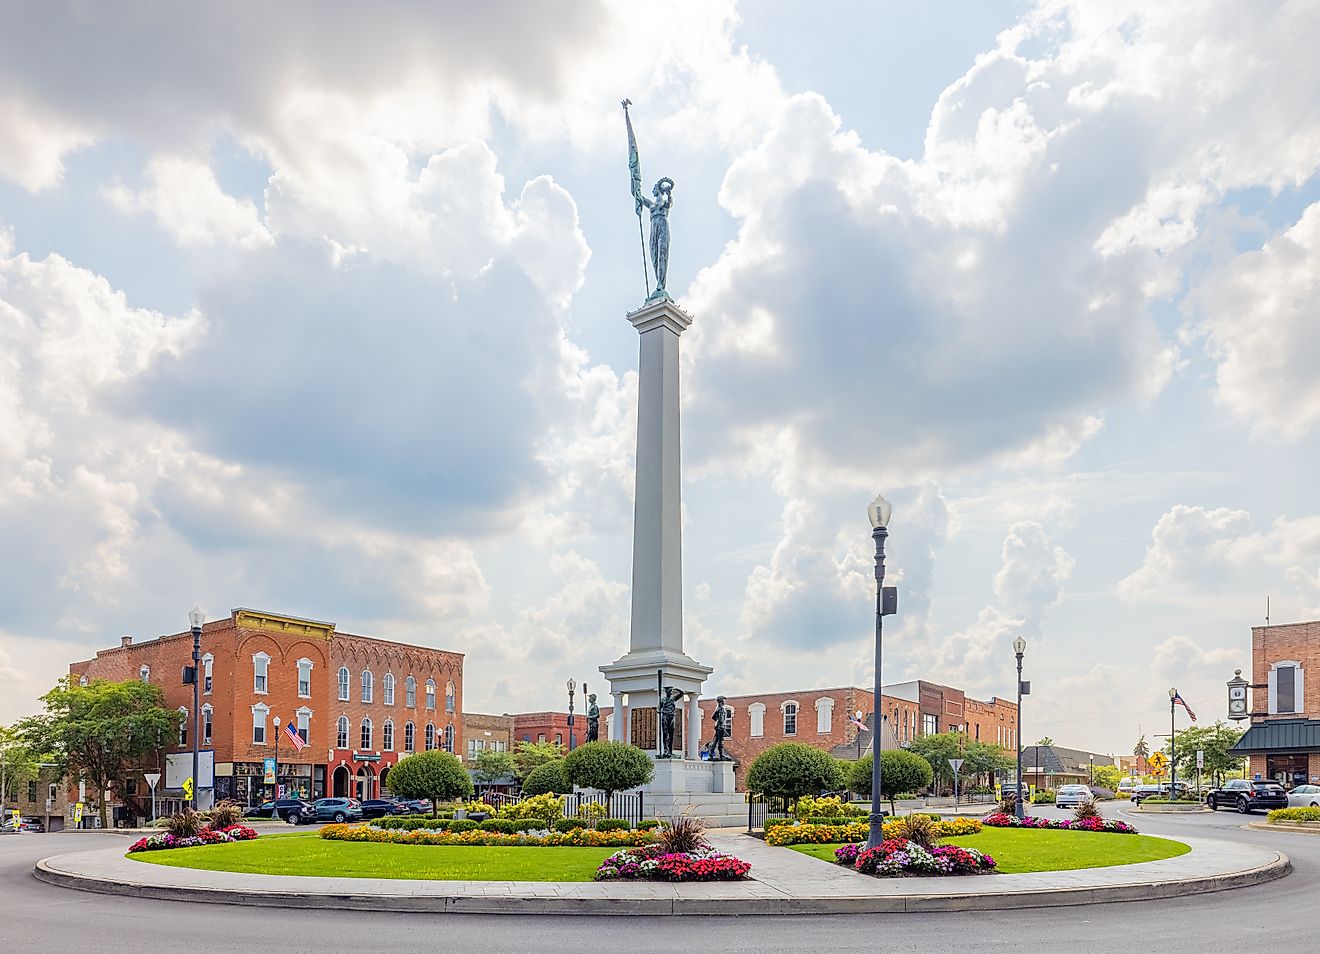 The Steuben County Soldiers Monument in downtown, with the old business district buildings